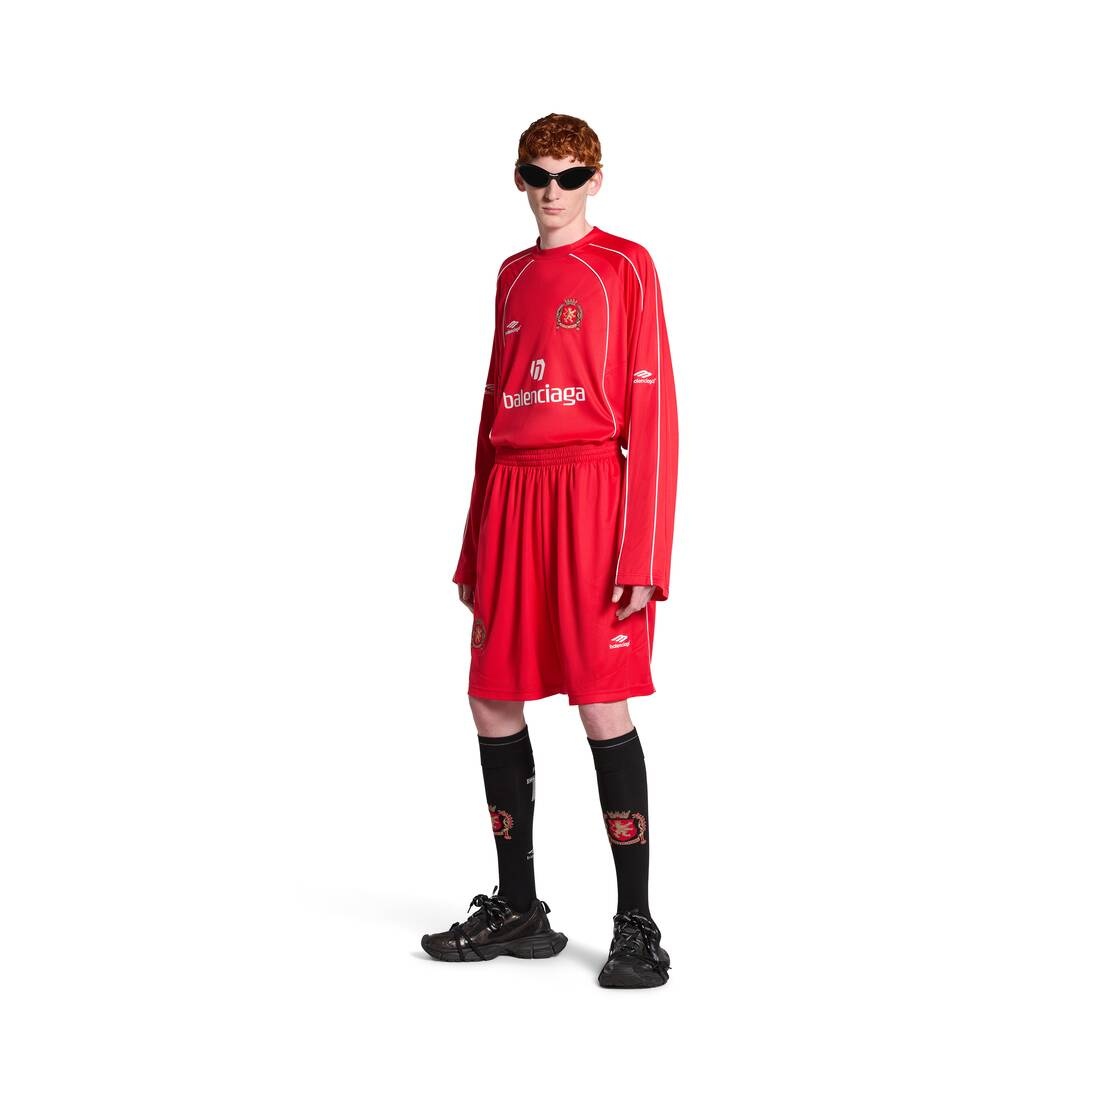 Soccer Baggy Shorts in Red/white - 2